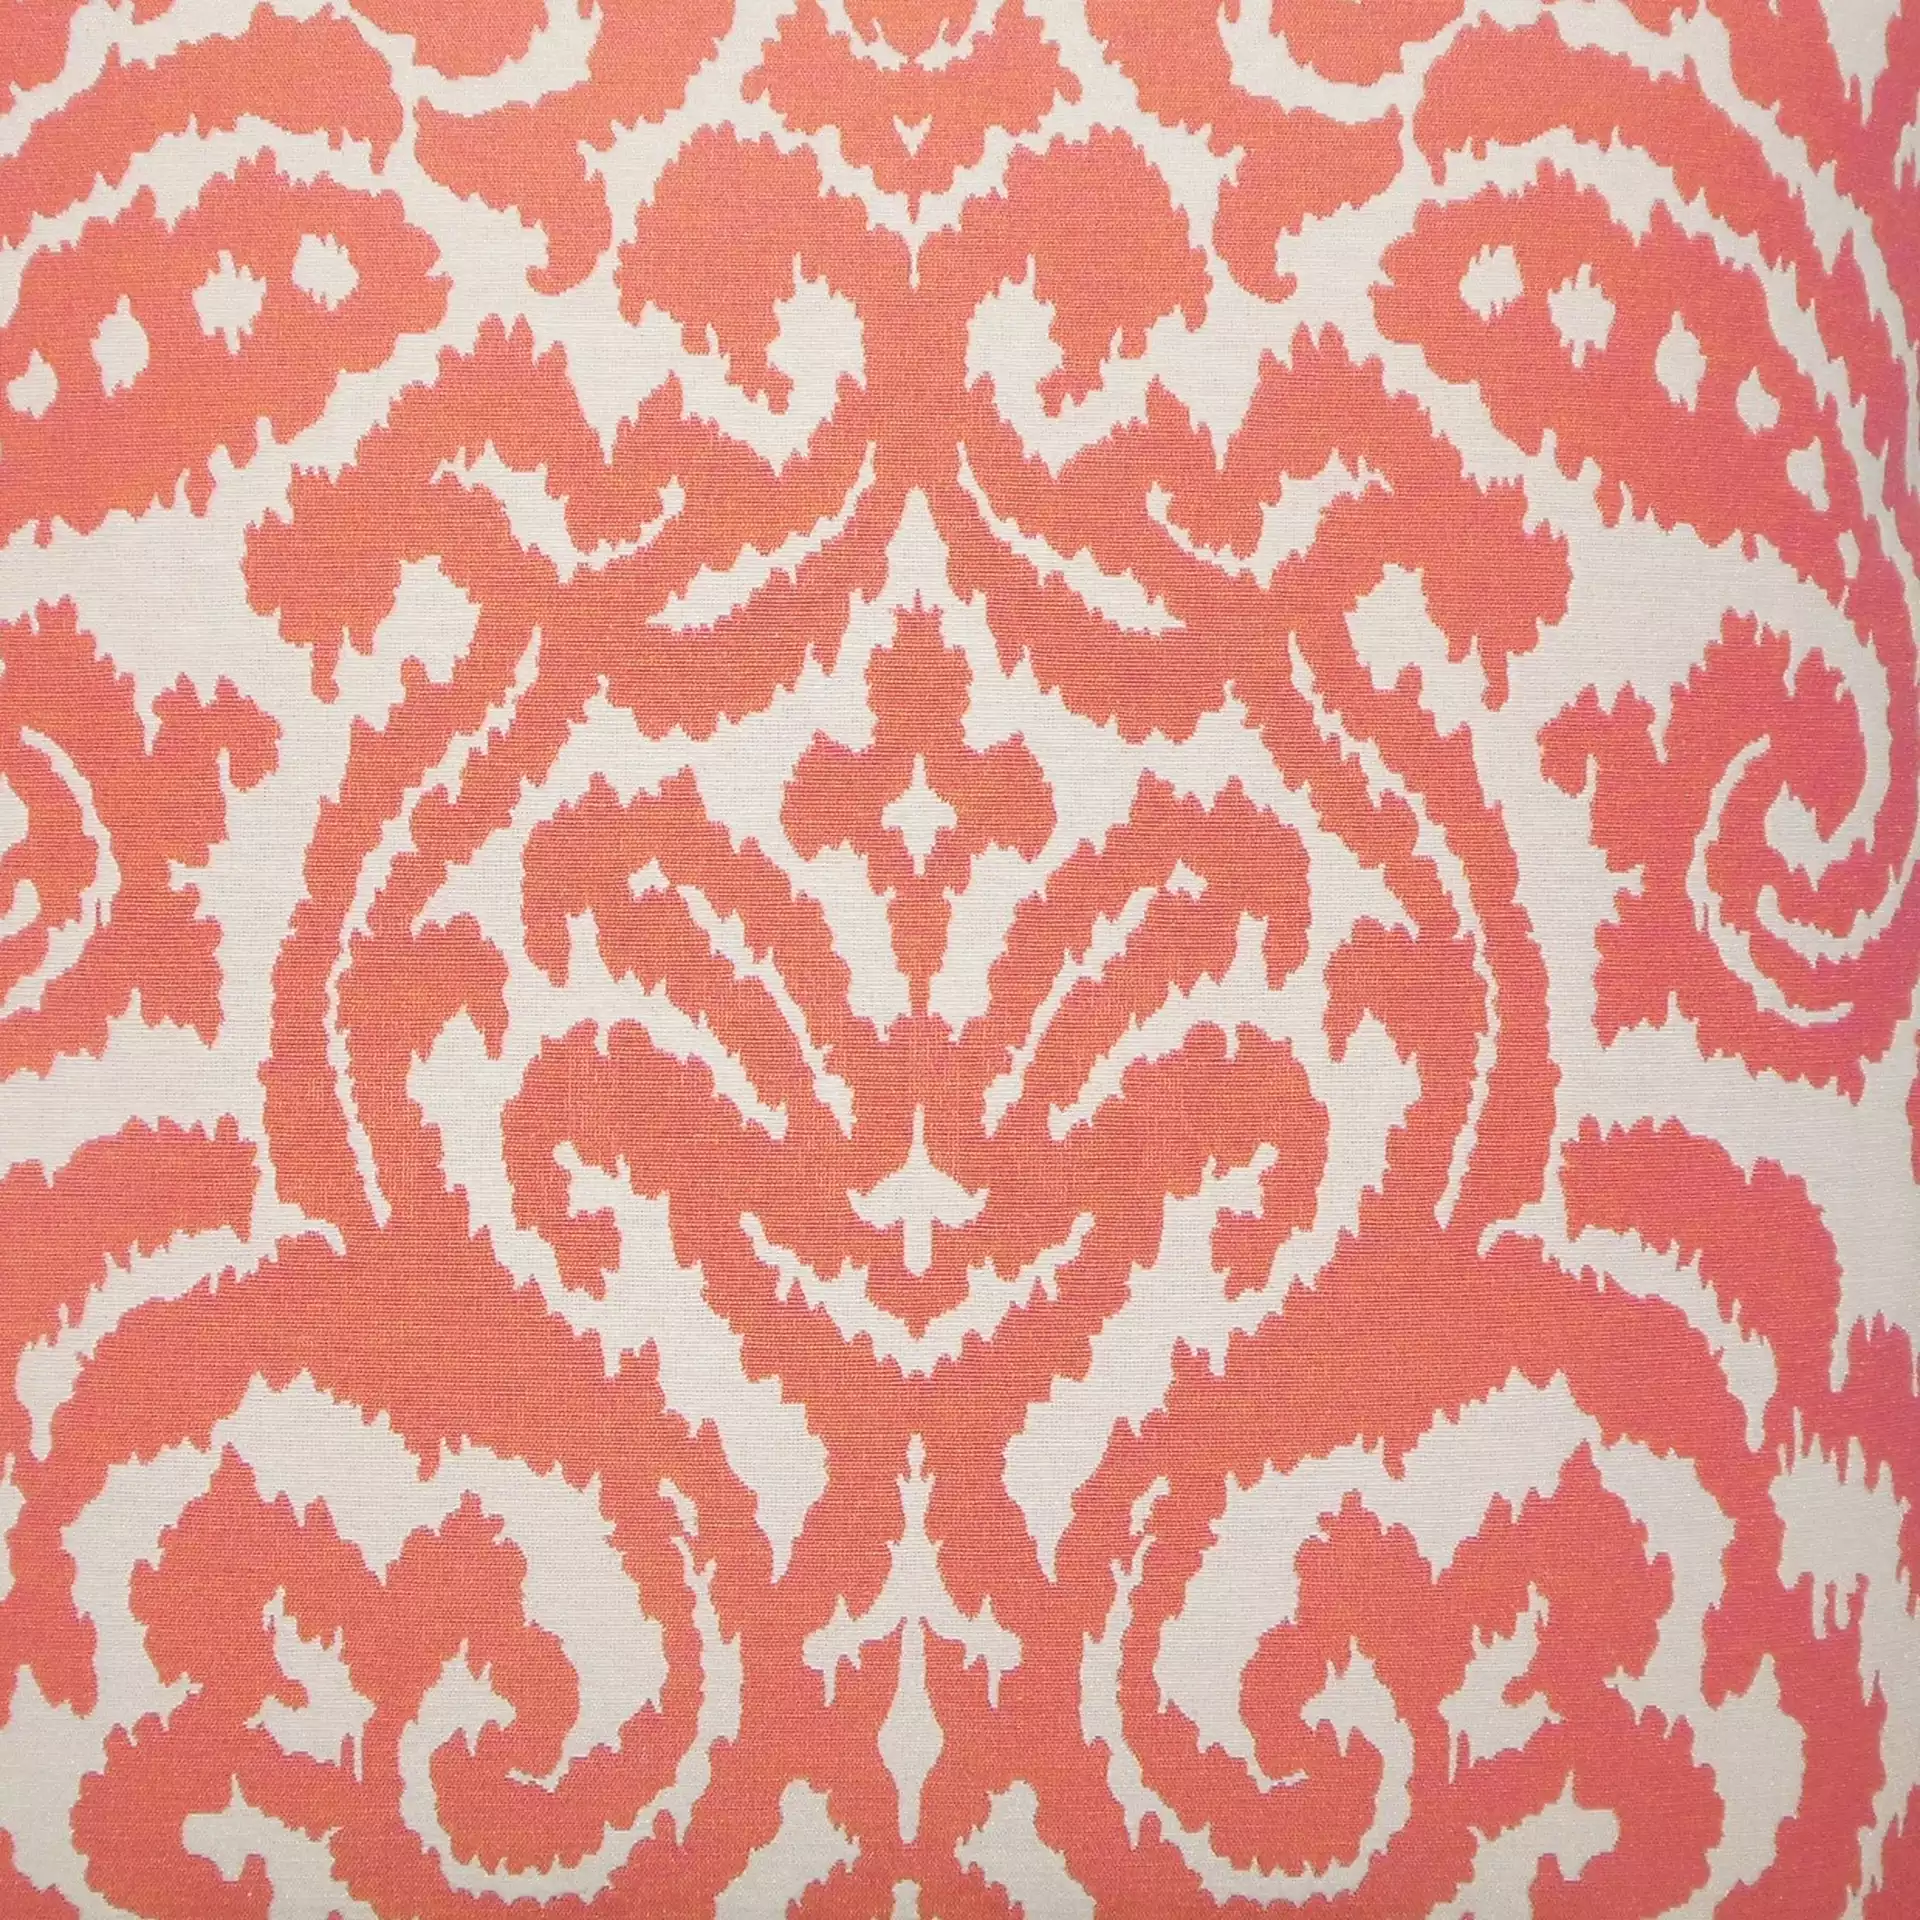 Wafai Ikat Pillow Coral - 18x18 - With insert